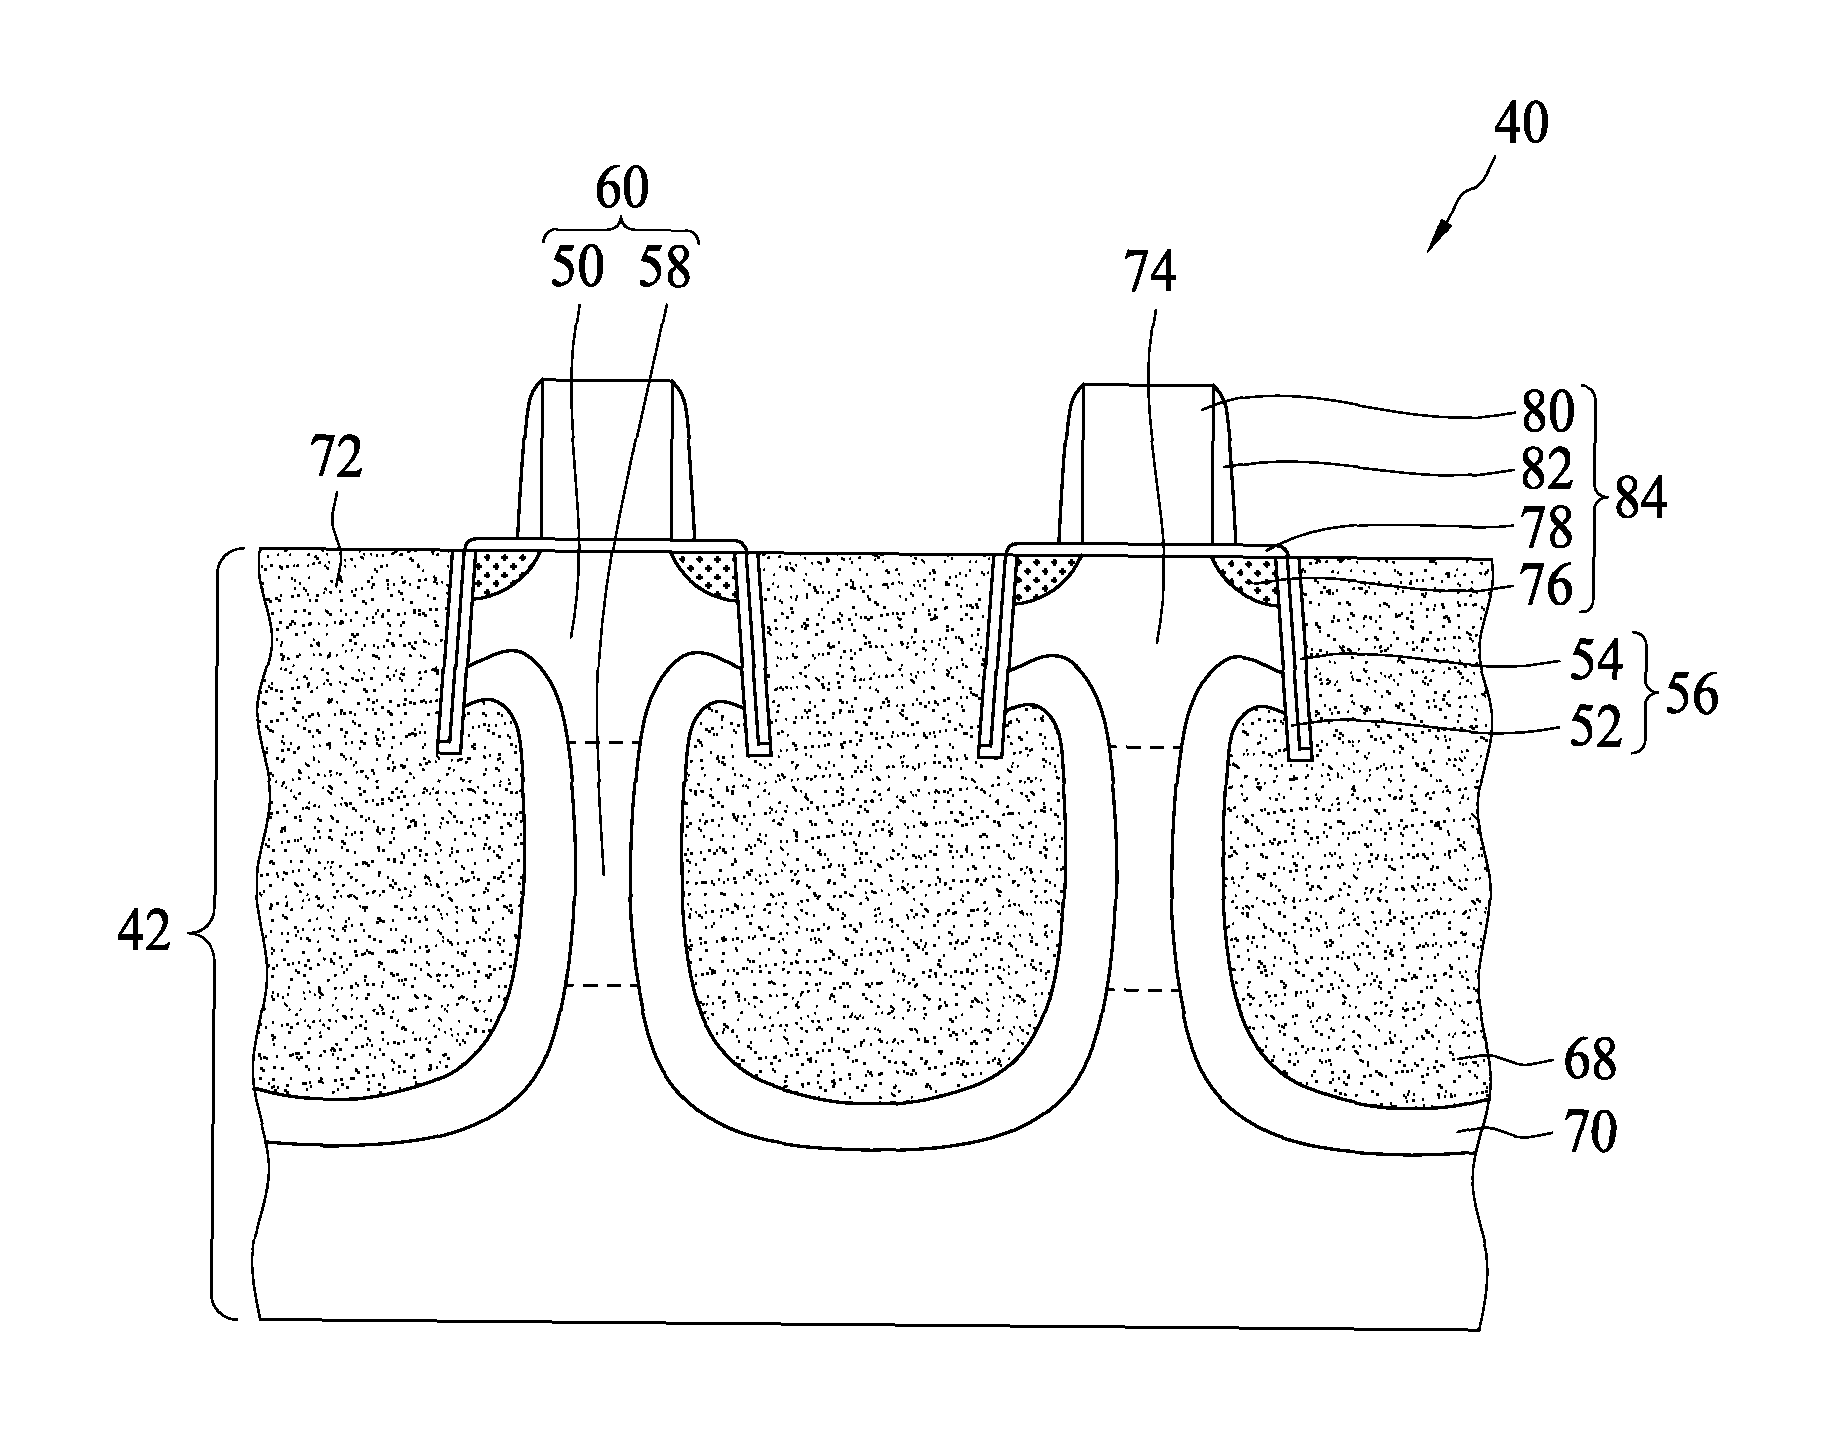 Integrated circuit structure having bottle-shaped isolation